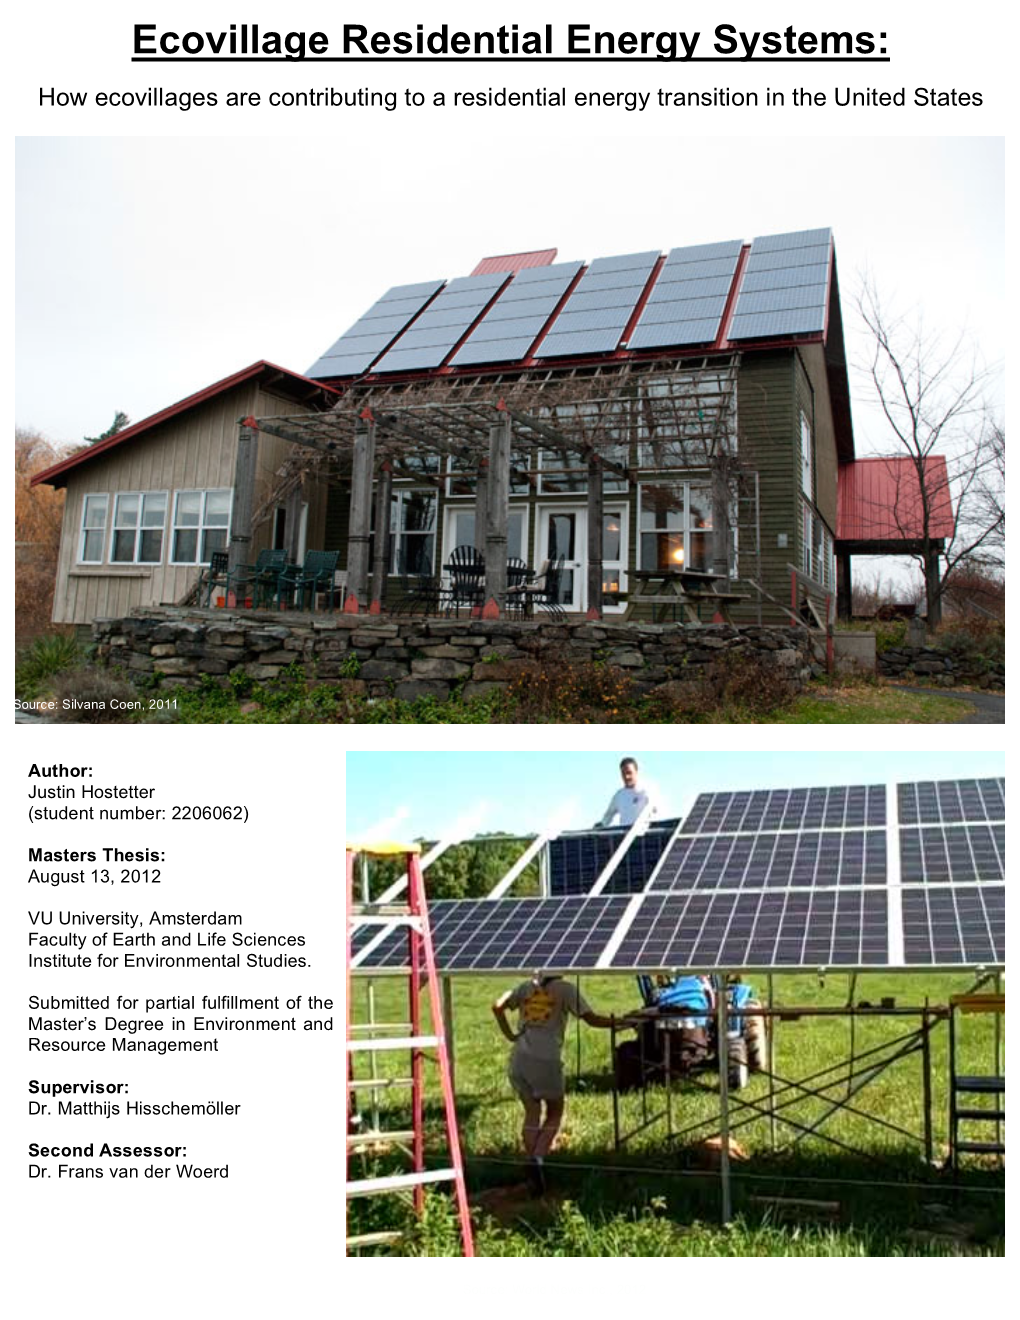 Ecovillage Residential Energy Systems